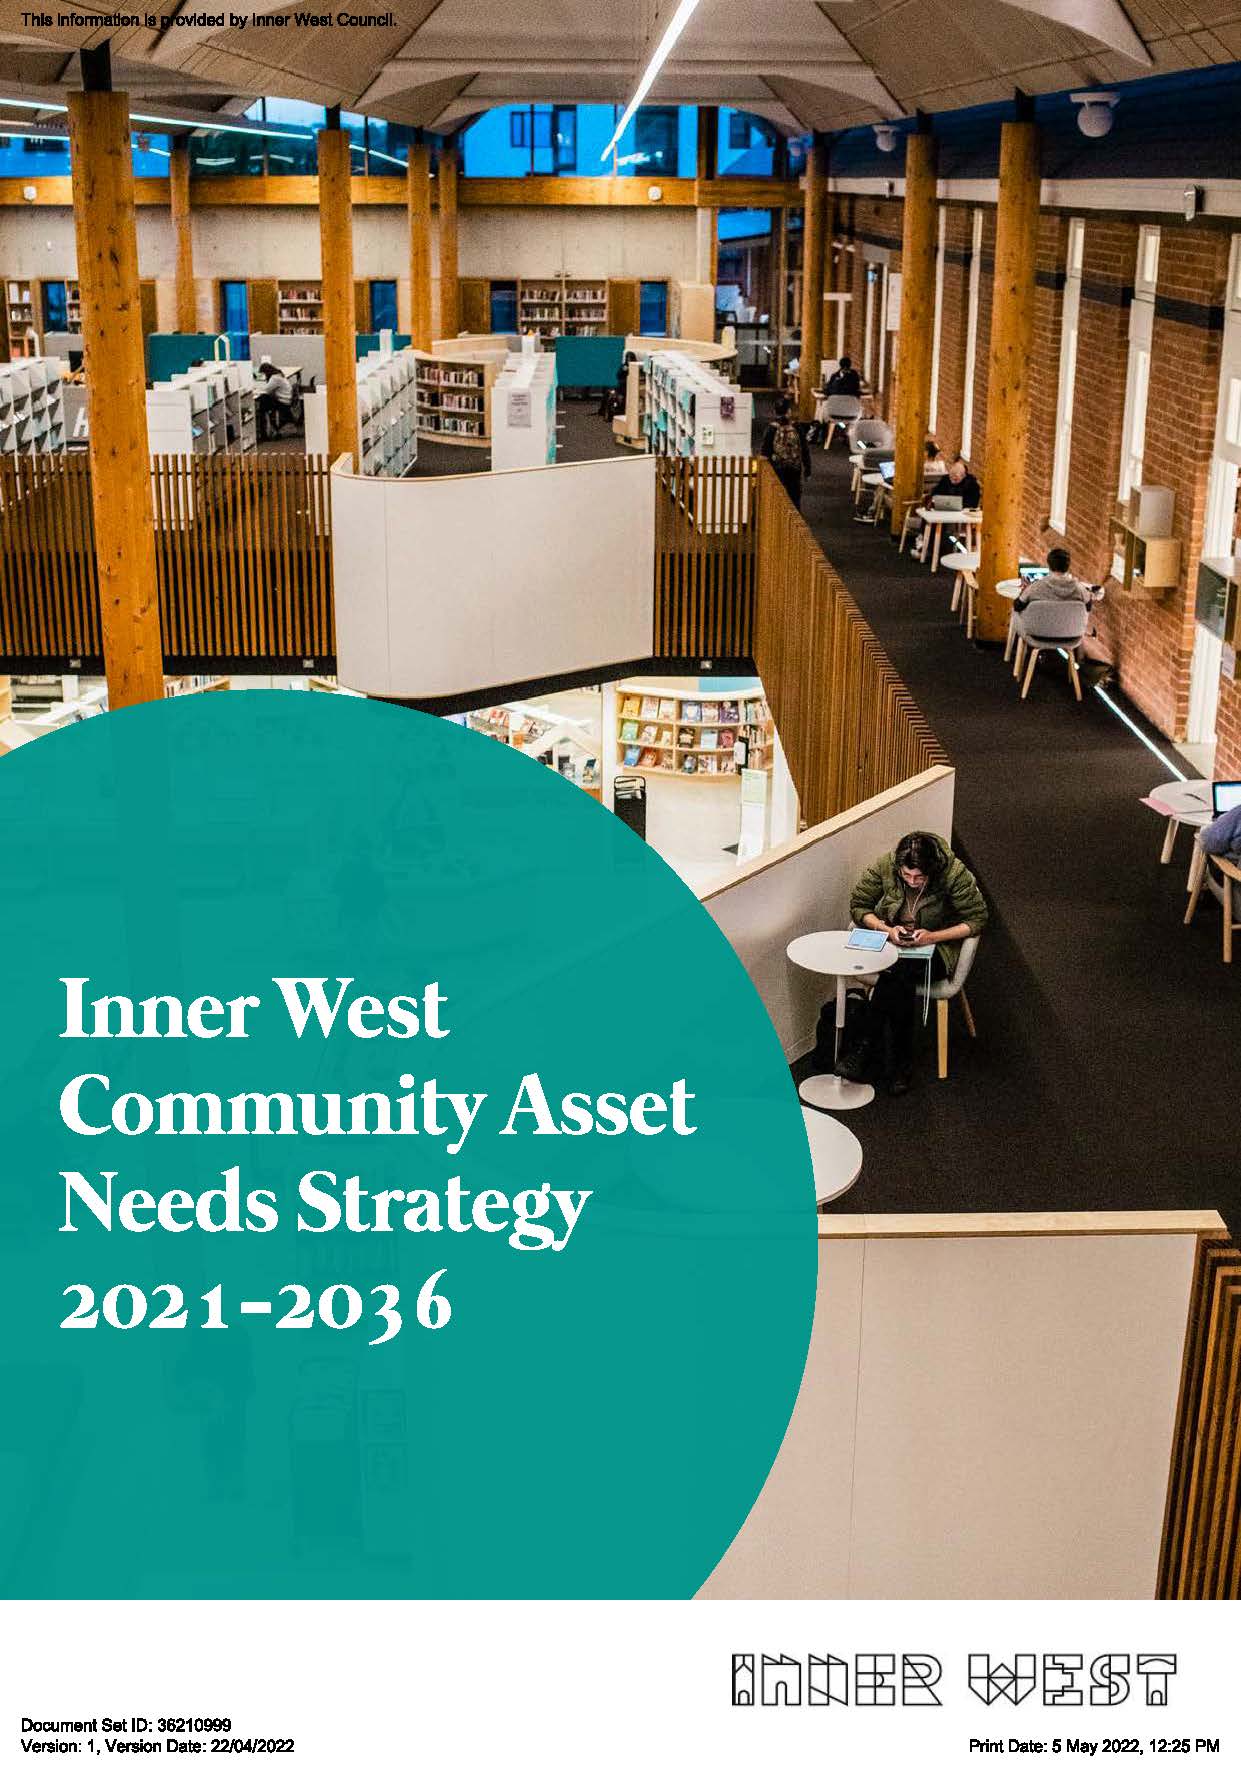 Cover image of the Community Asset Needs Strategy 2021-2036. Clicking the image links to the document library.